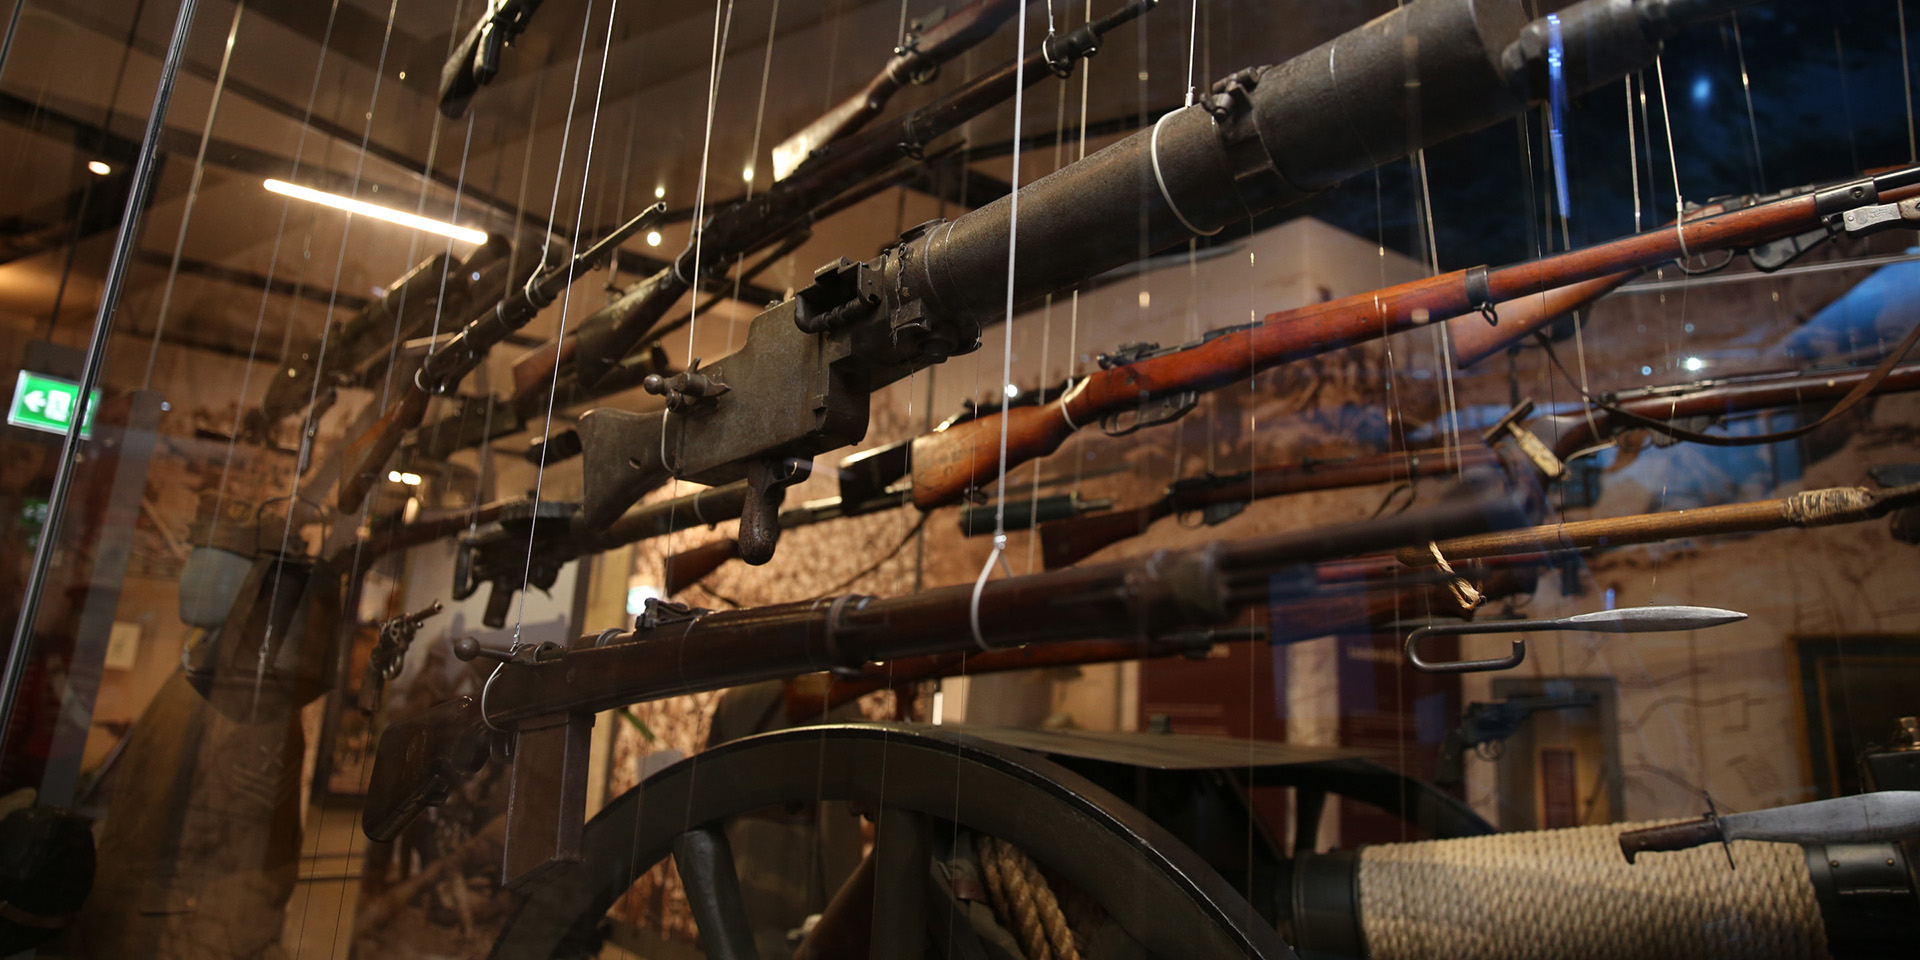 Mass weapons display in the Conflict in Europe gallery